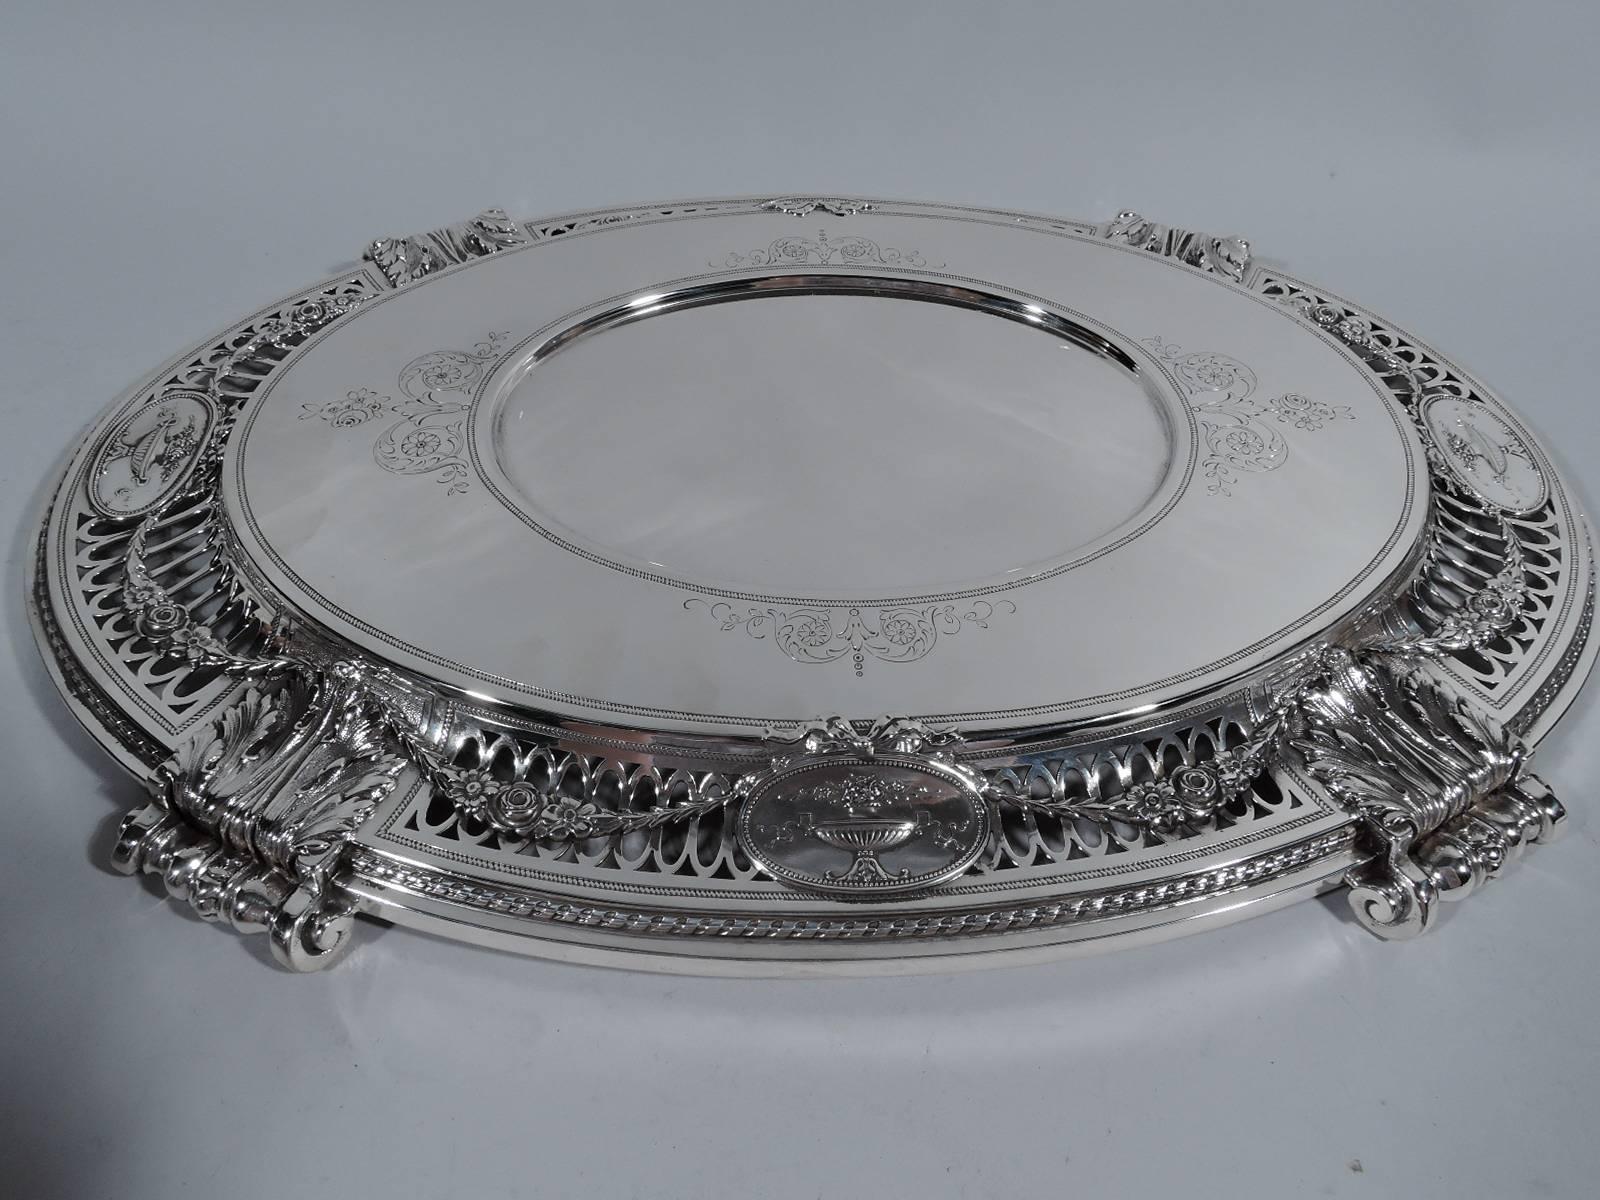 20th Century Bailey, Banks and Biddle French Neoclassical Centrepiece Bowl on Plateau